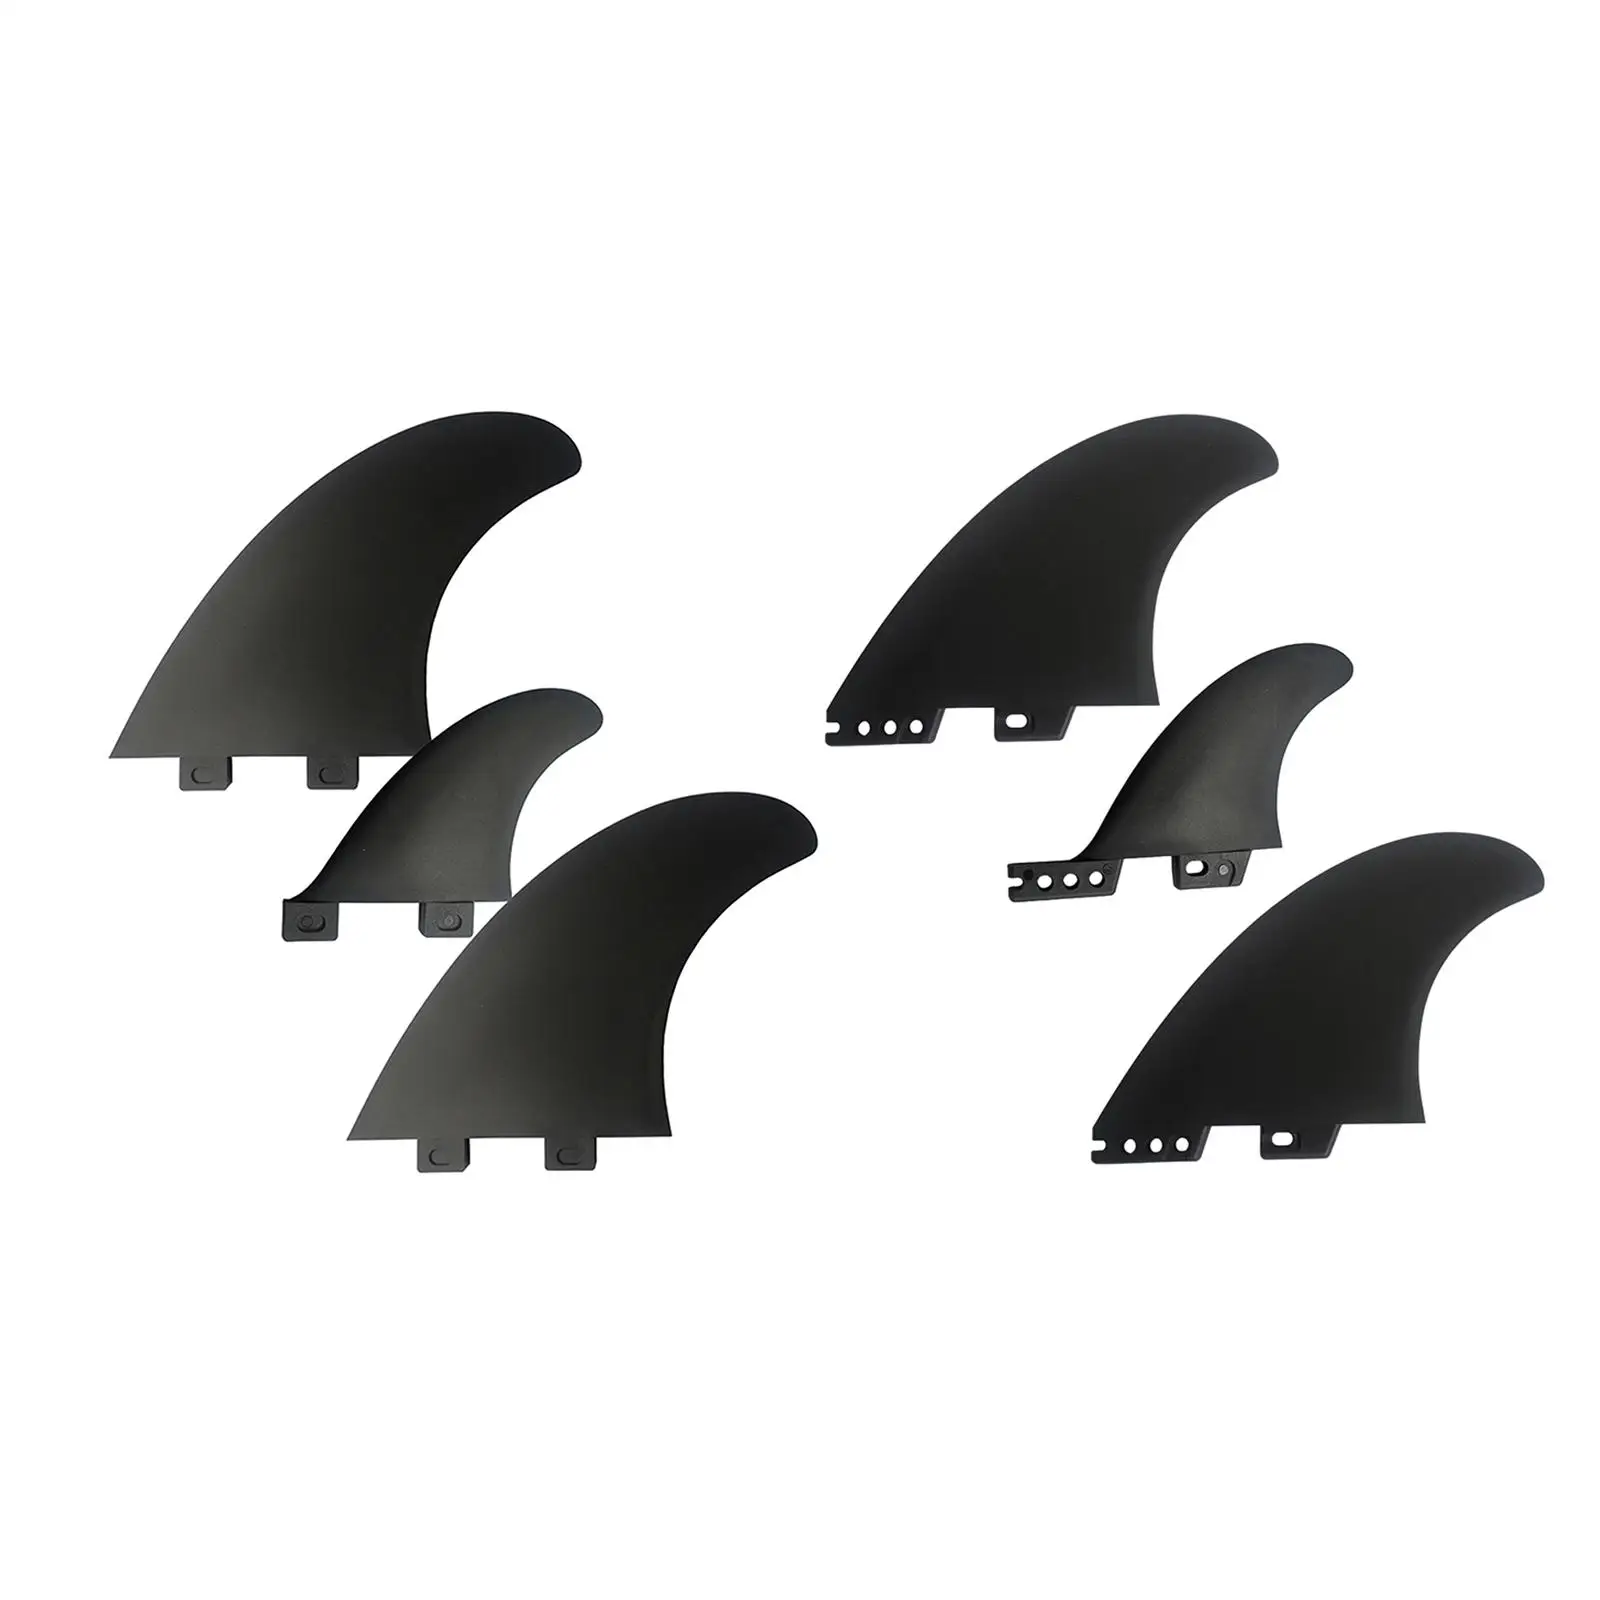 3x Surfboard Fins Surfing Fin Quick Release Replacement Durable for Boat Paddleboard Water Sports Longboard Accessory